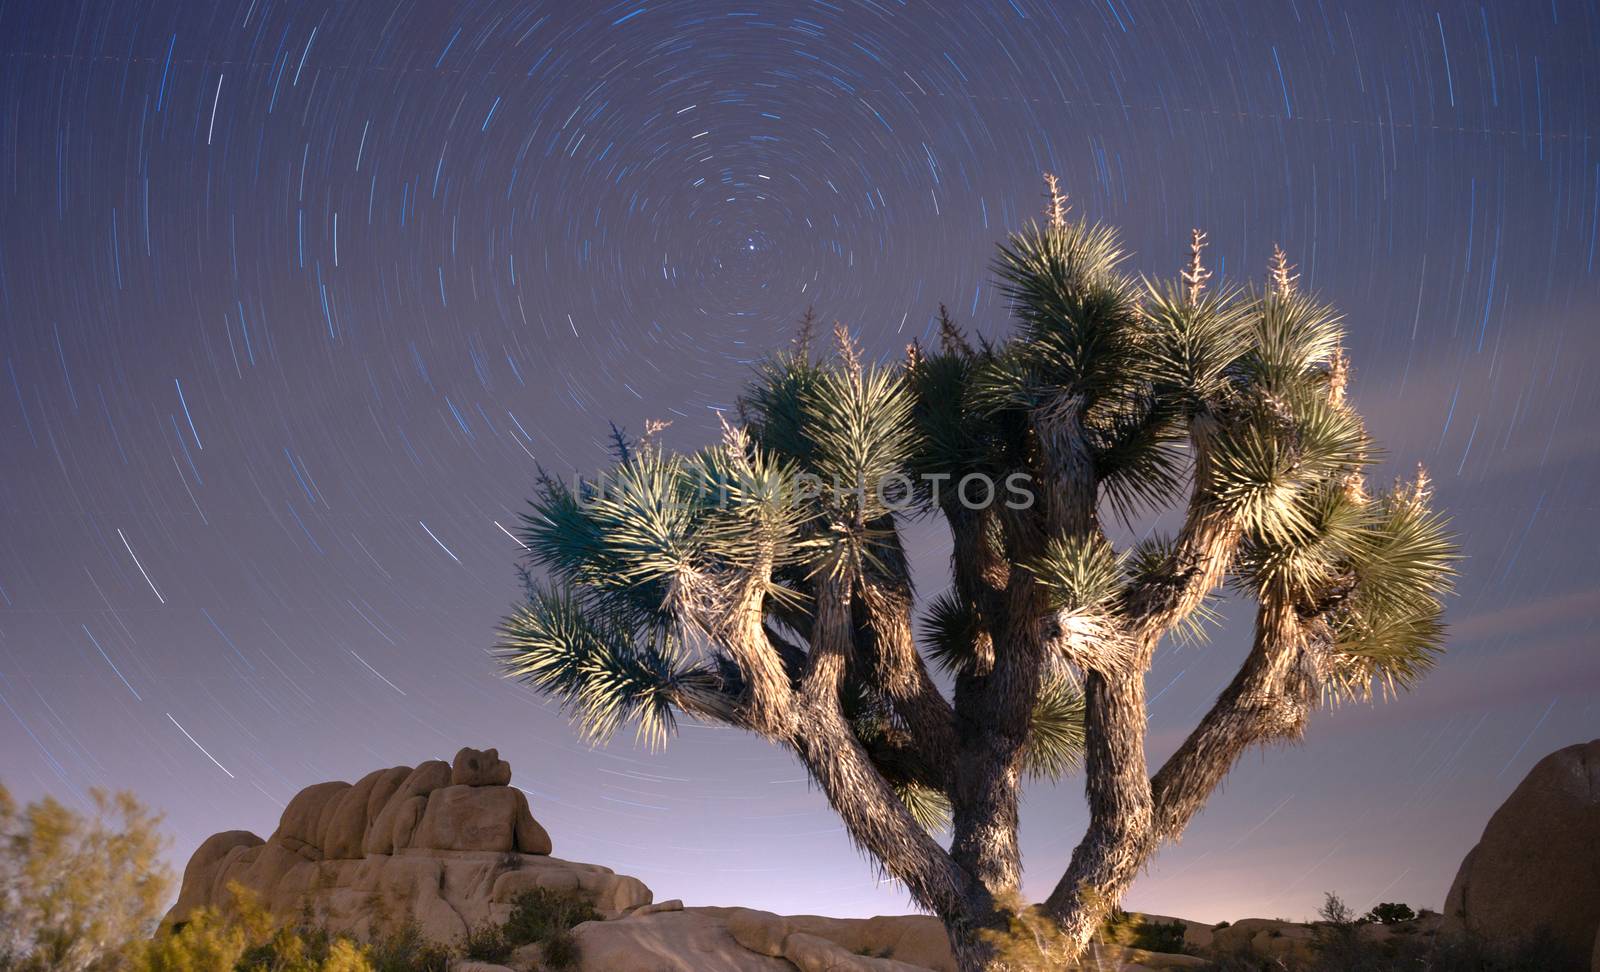 North Star Trails Long Exposure Astronomy Joshua Tree Night Sky by ChrisBoswell